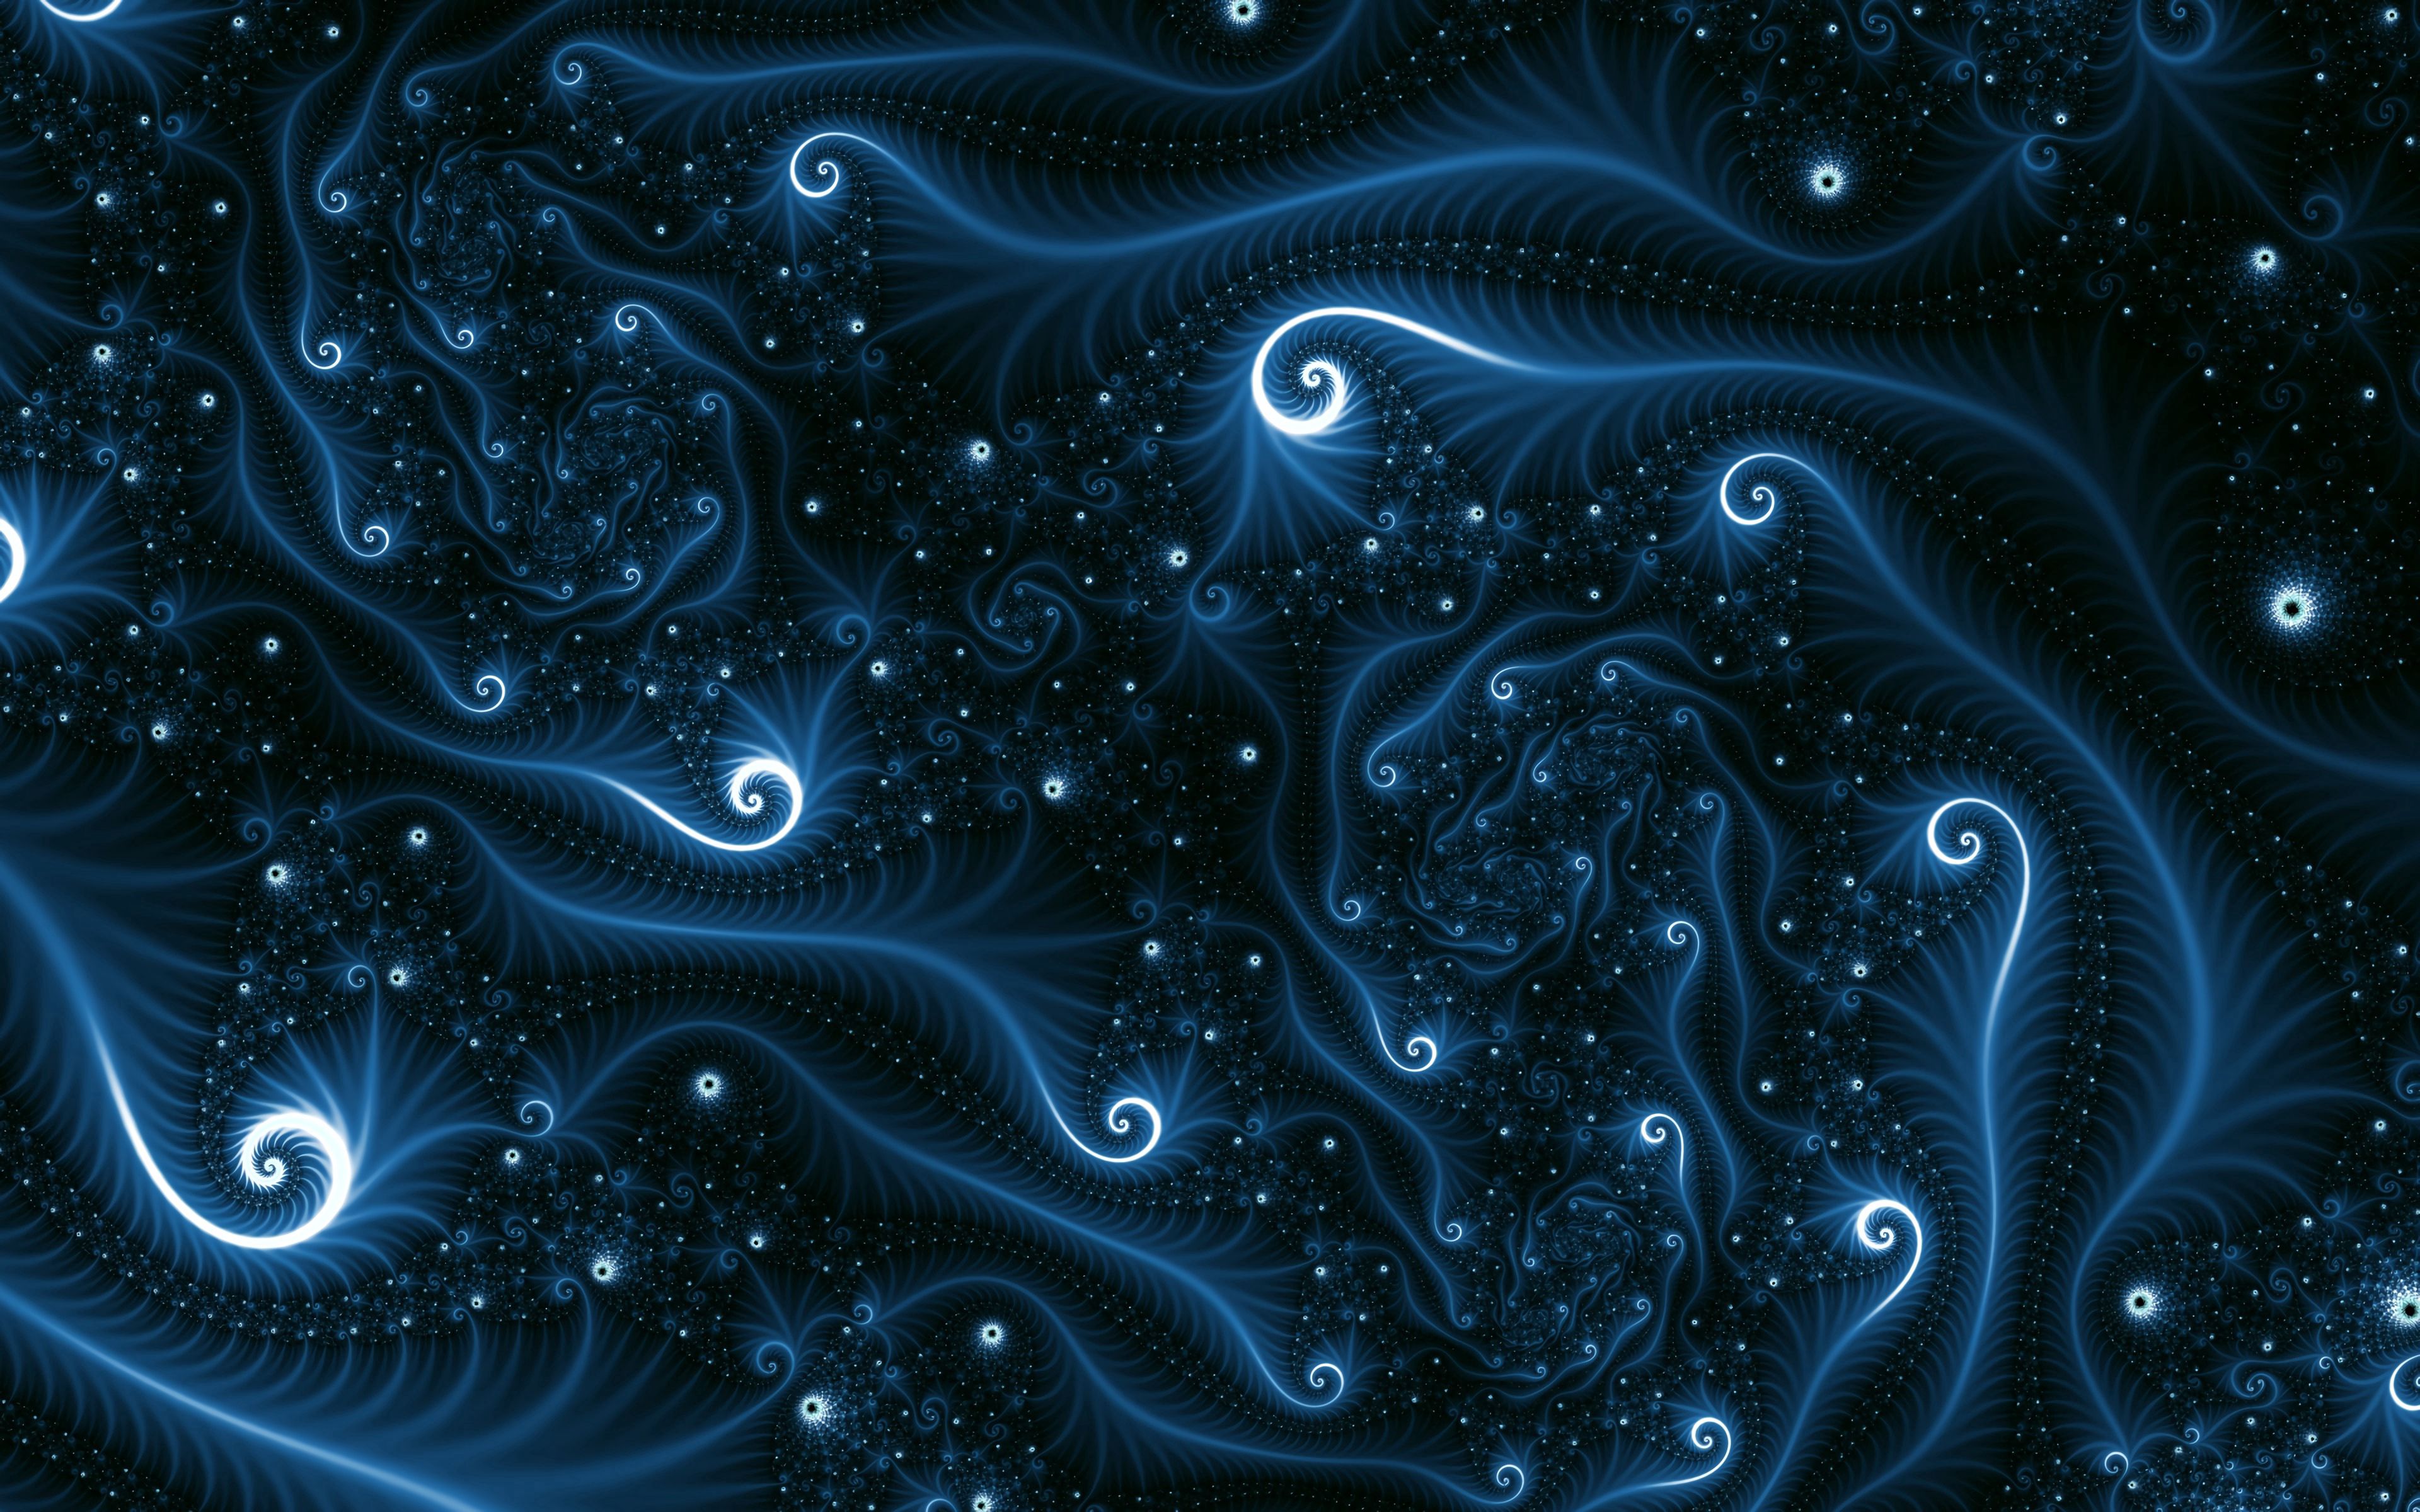 intricate, confused, abstract, fractal, glow, winding, sinuous, swirling, involute